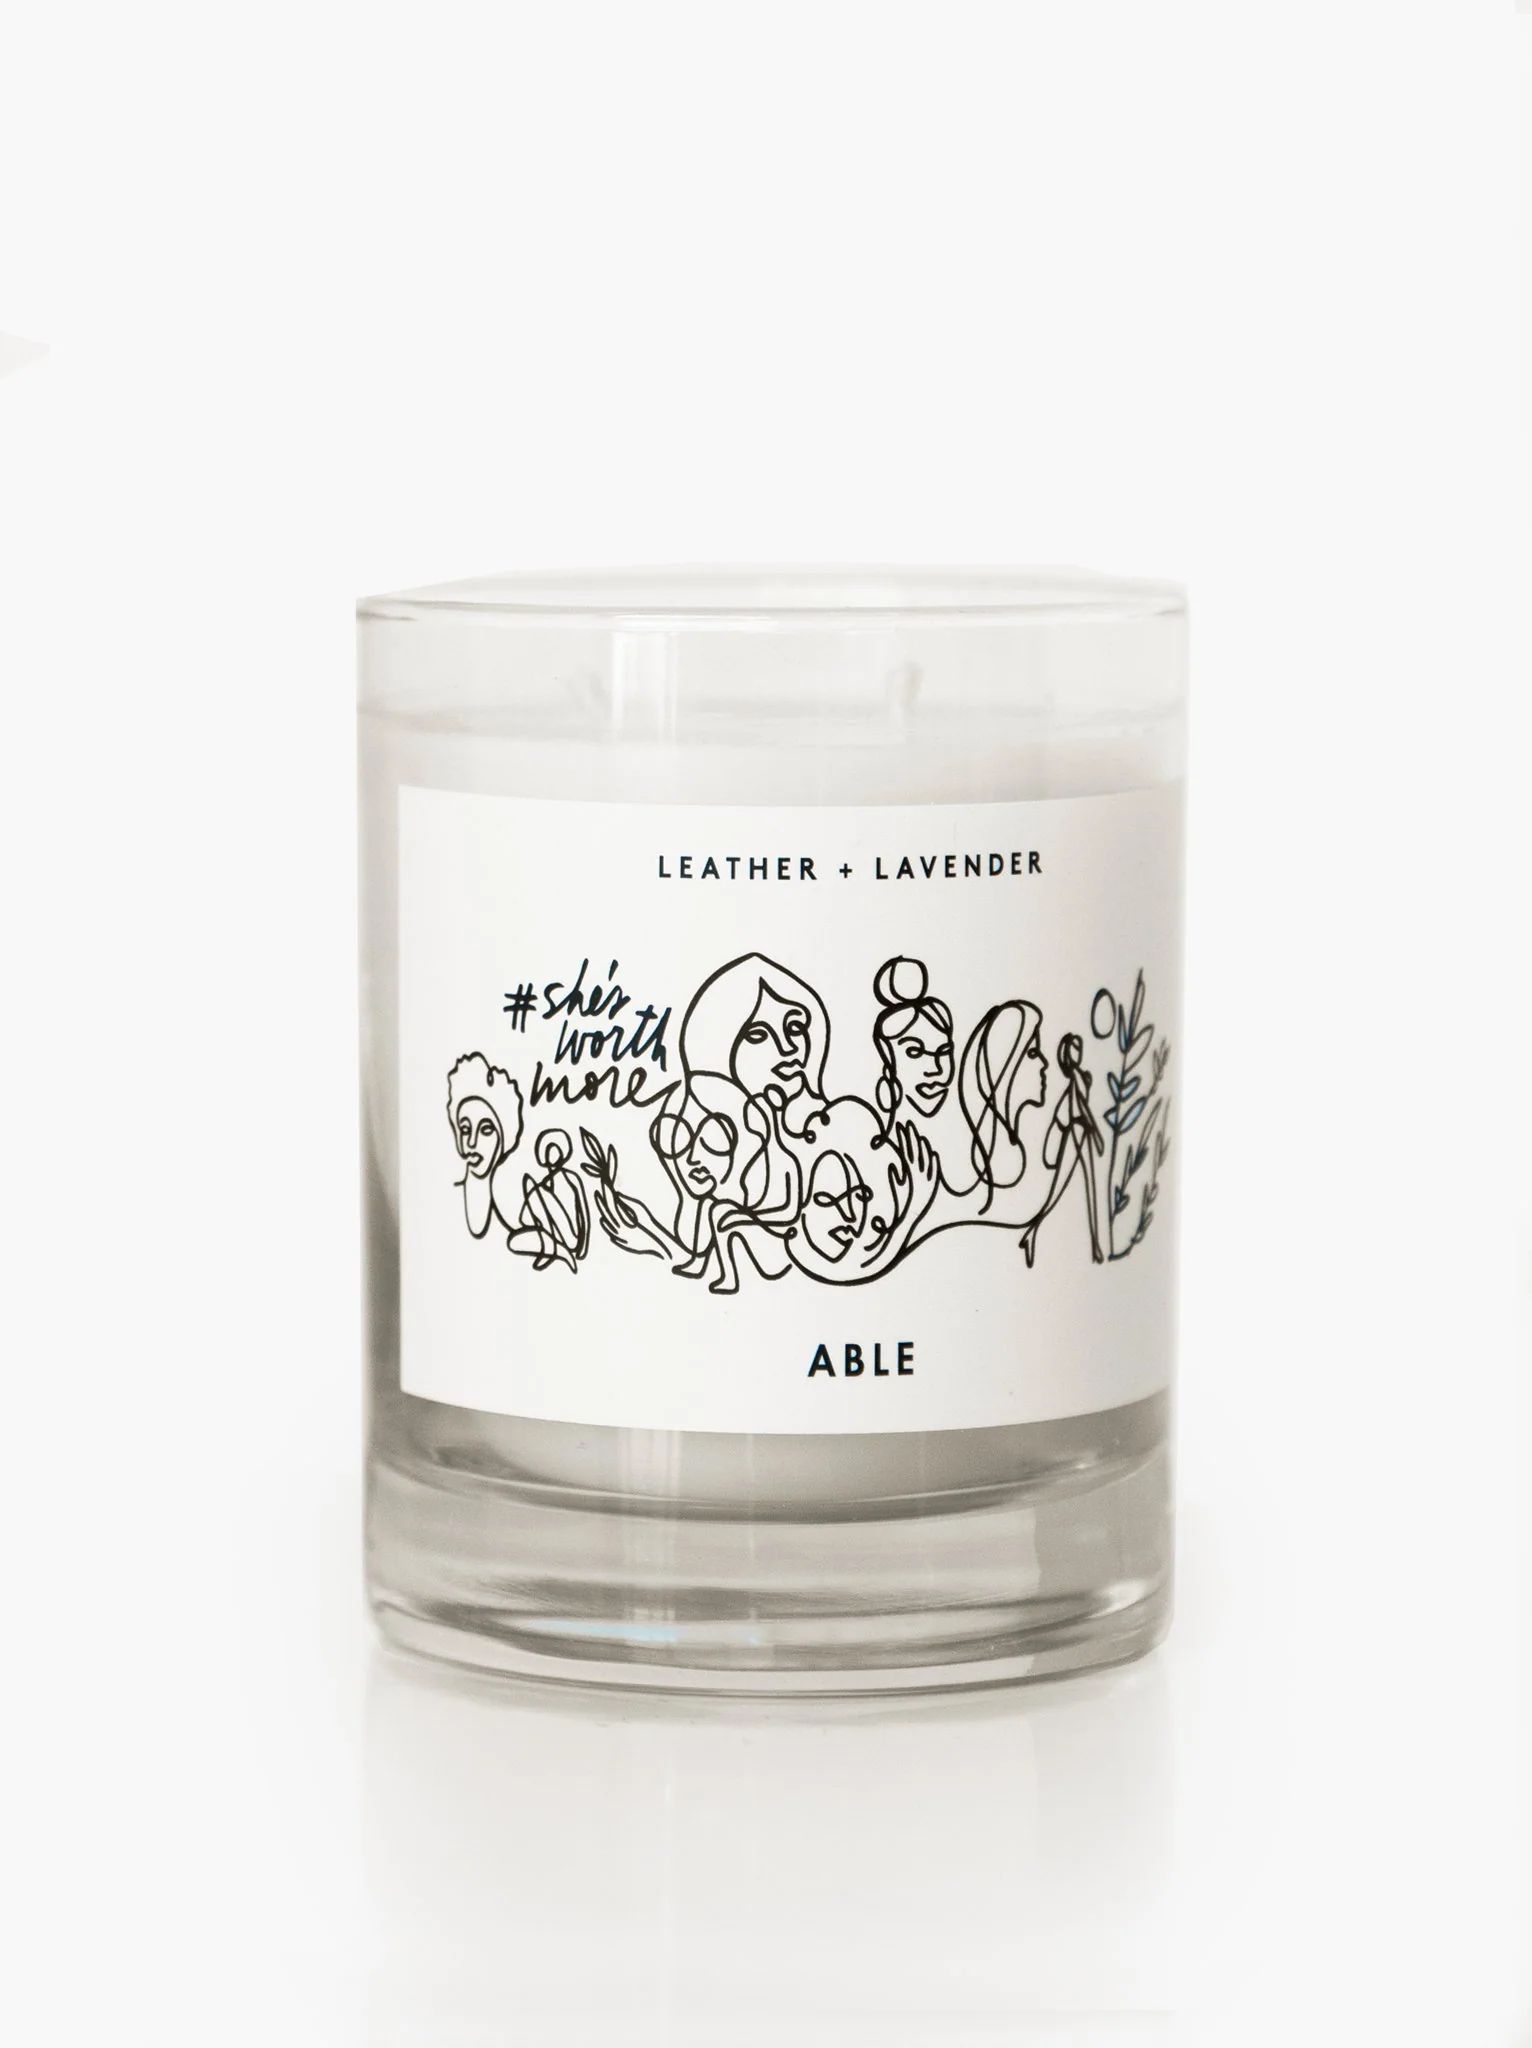 Leather + Lavender Scented Candle | ABLE